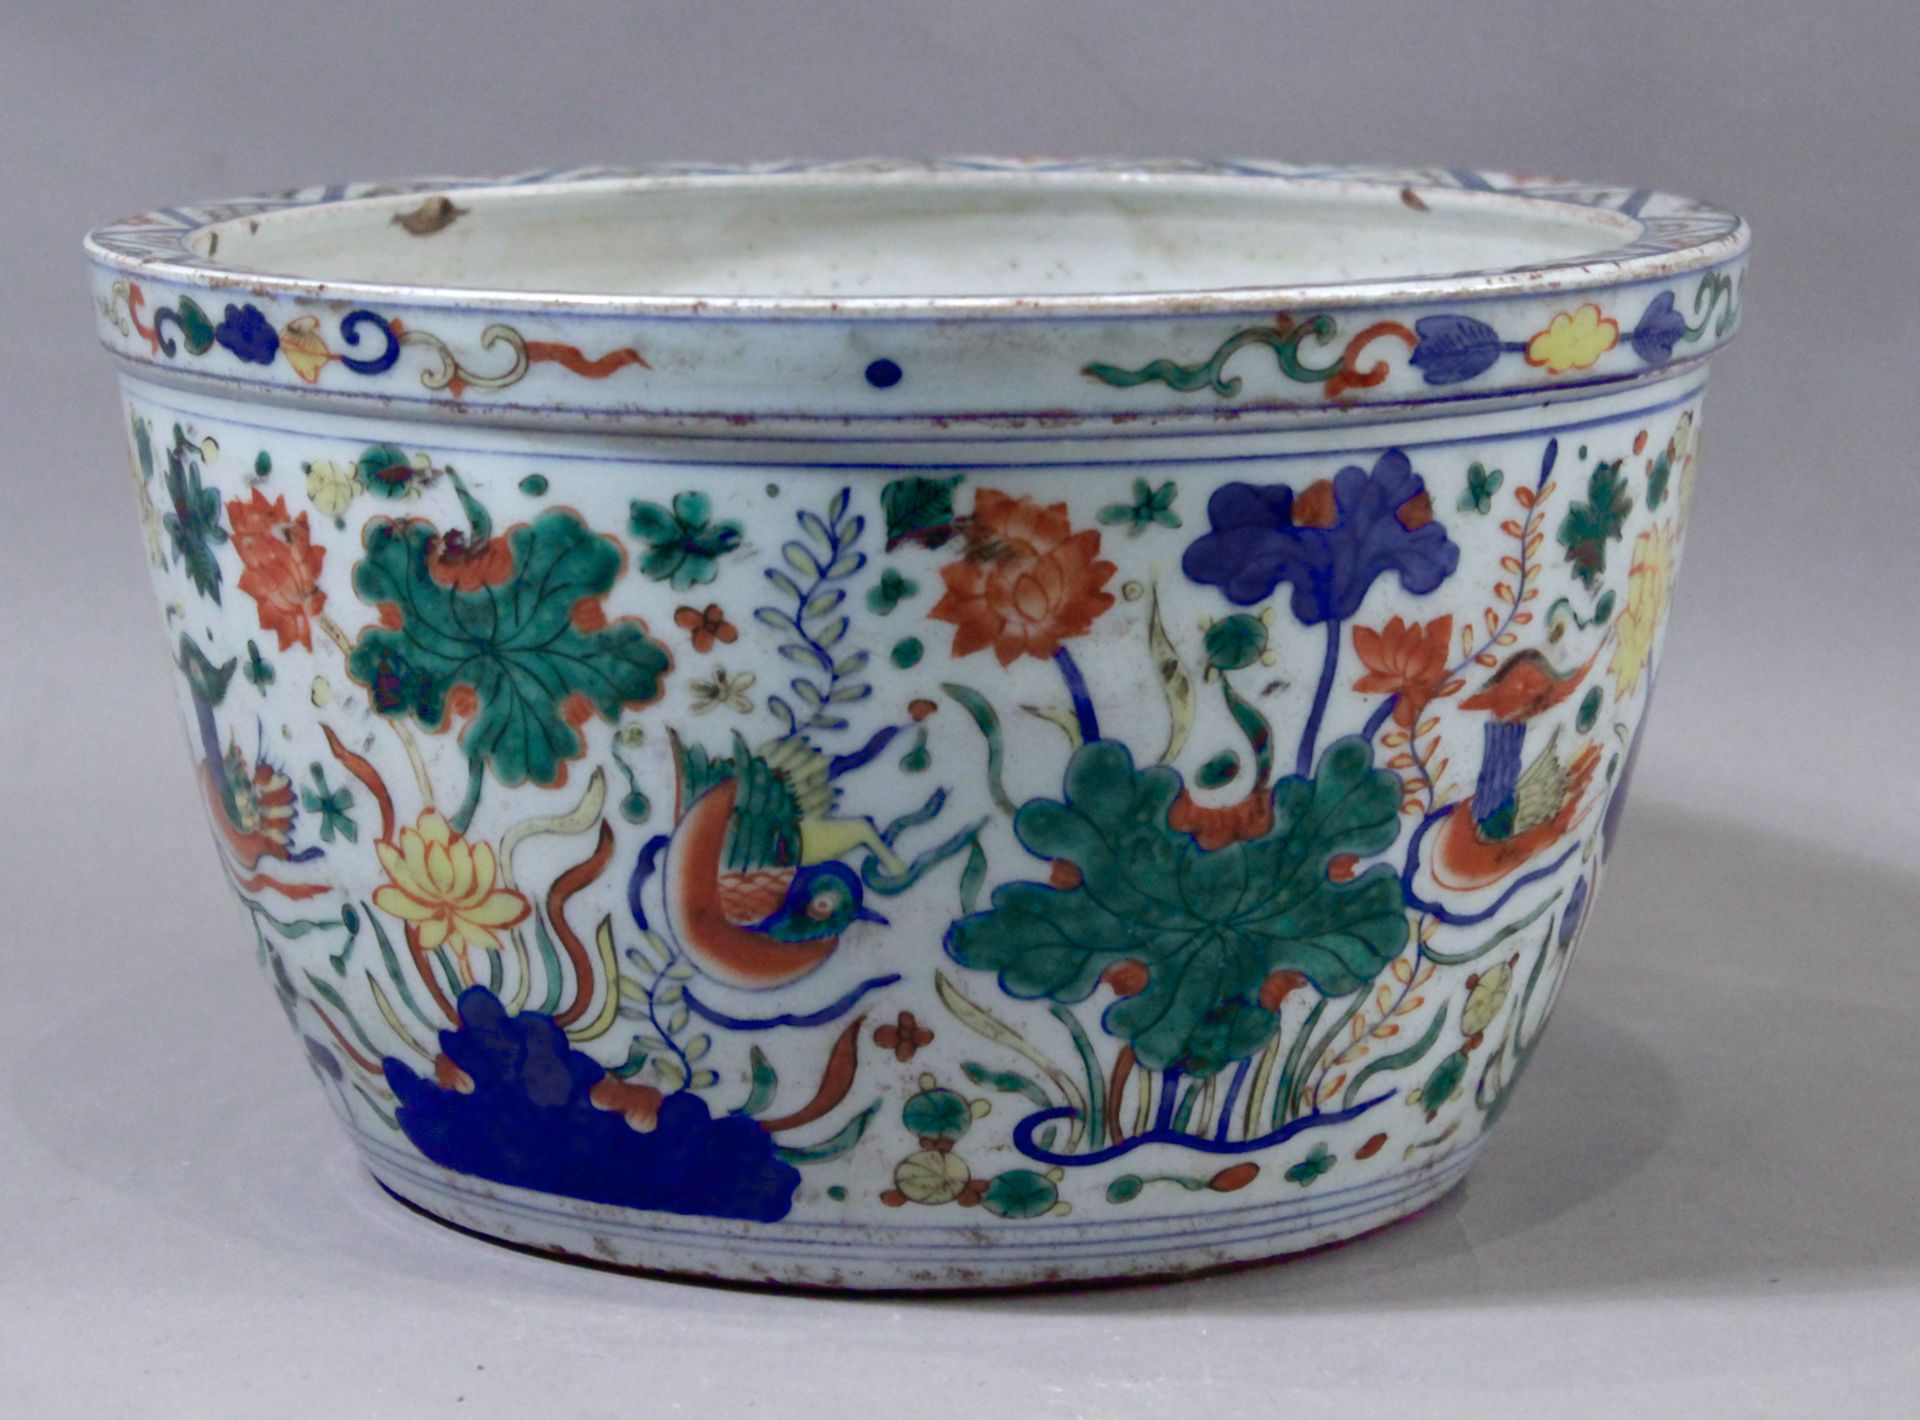 20th century Chinese cache pot in Wucai porcelain - Image 2 of 3